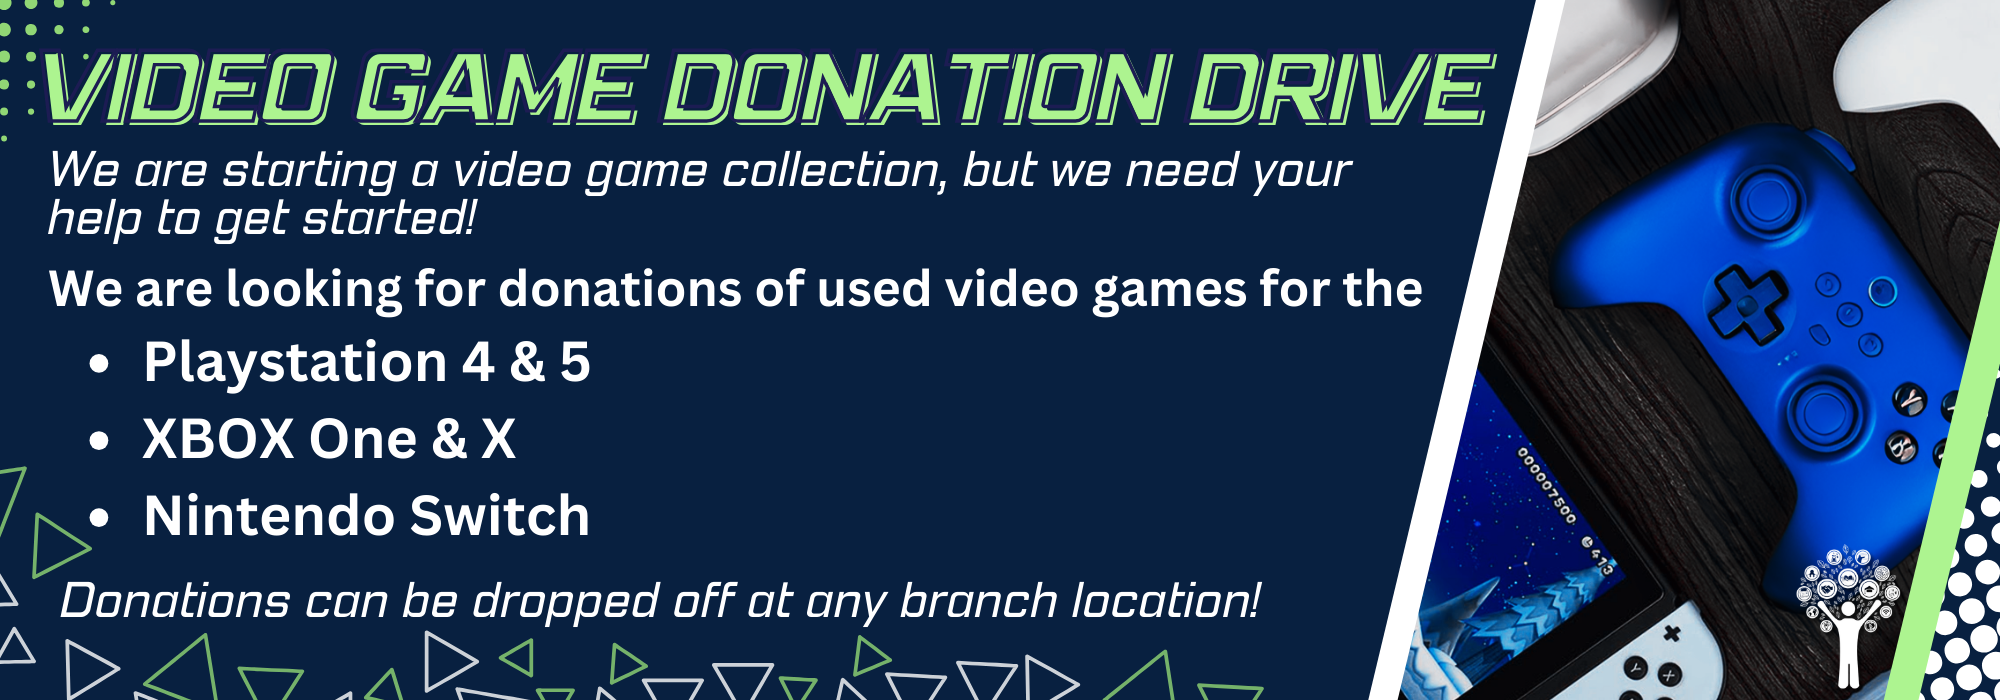 Video Game Donation drive